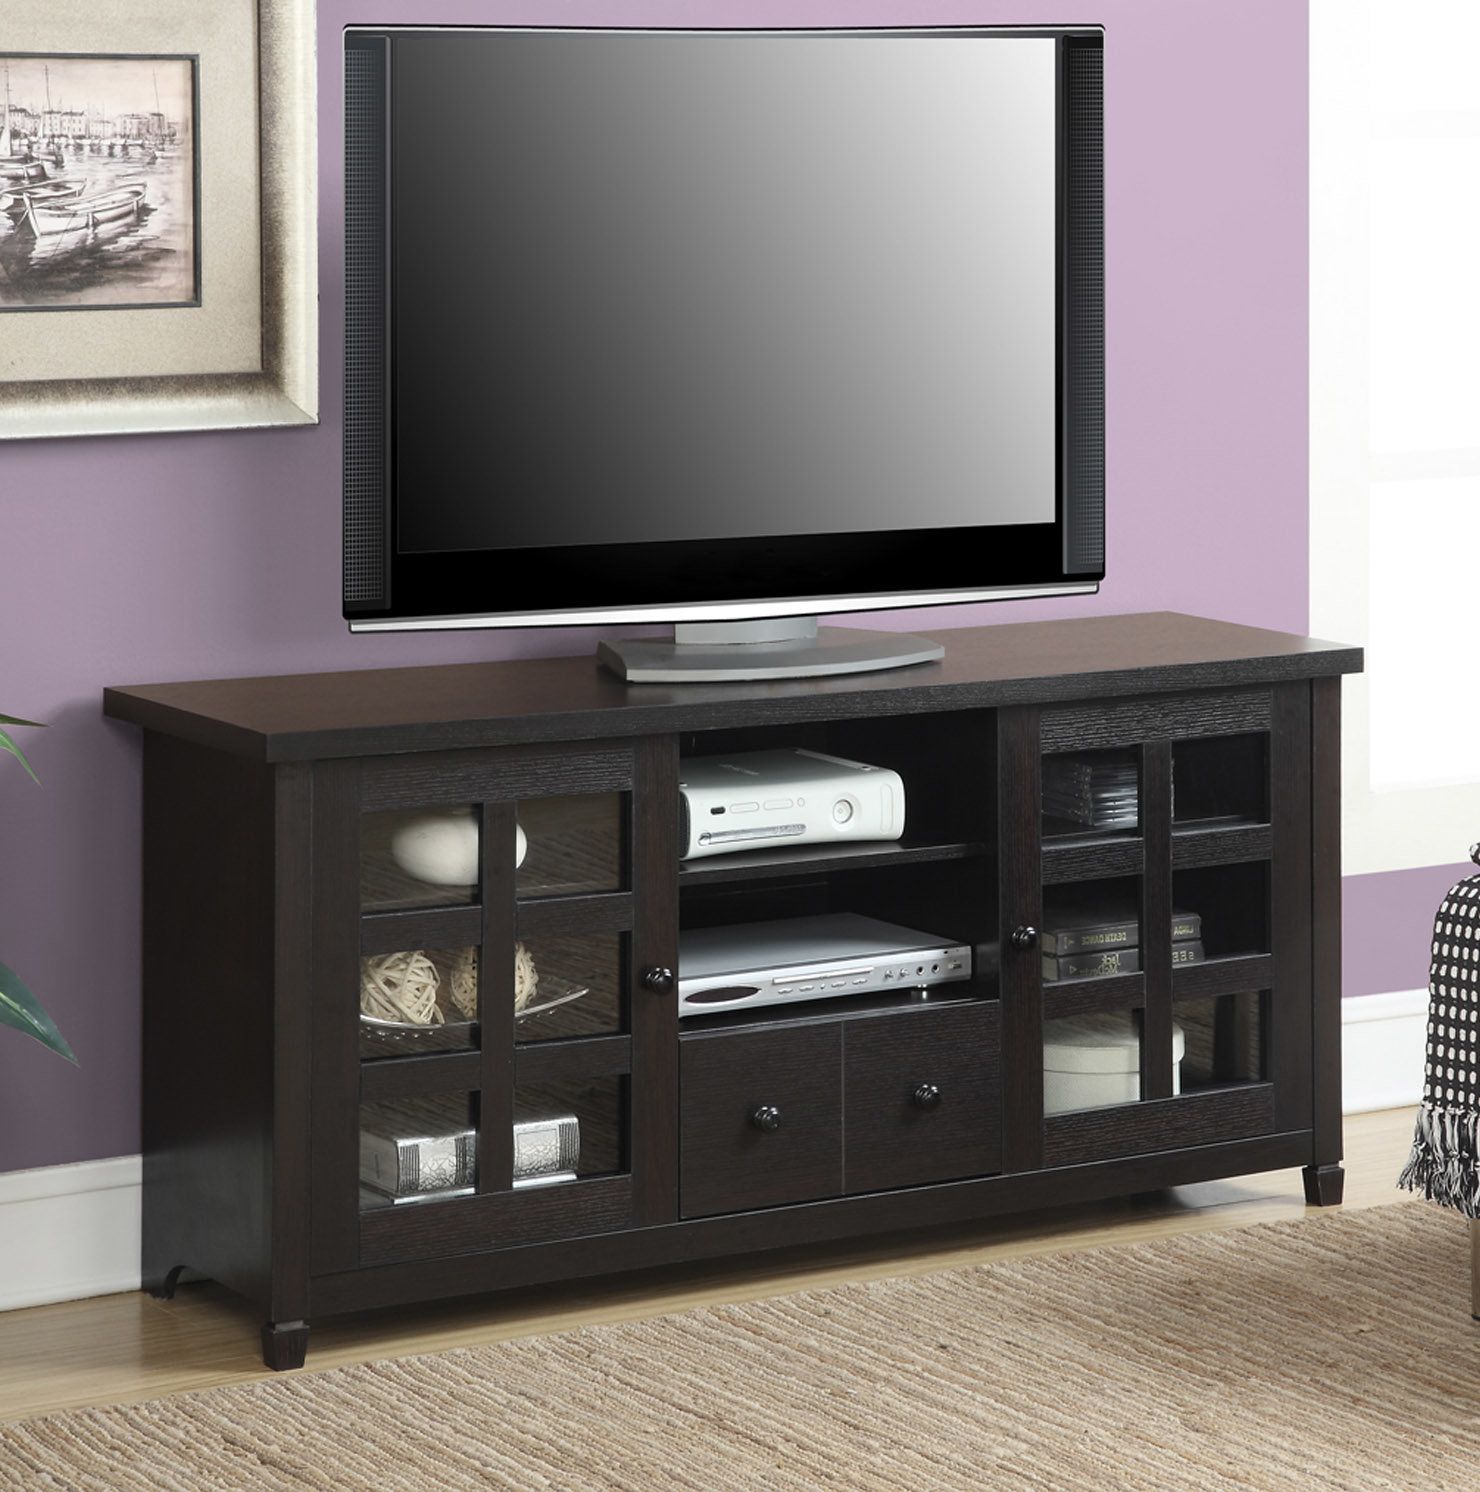 Andover Mills Shepparton Tv Stand For Tvs Up To 60" & Reviews | Wayfair Throughout Laurent 60 Inch Tv Stands (Gallery 12 of 20)